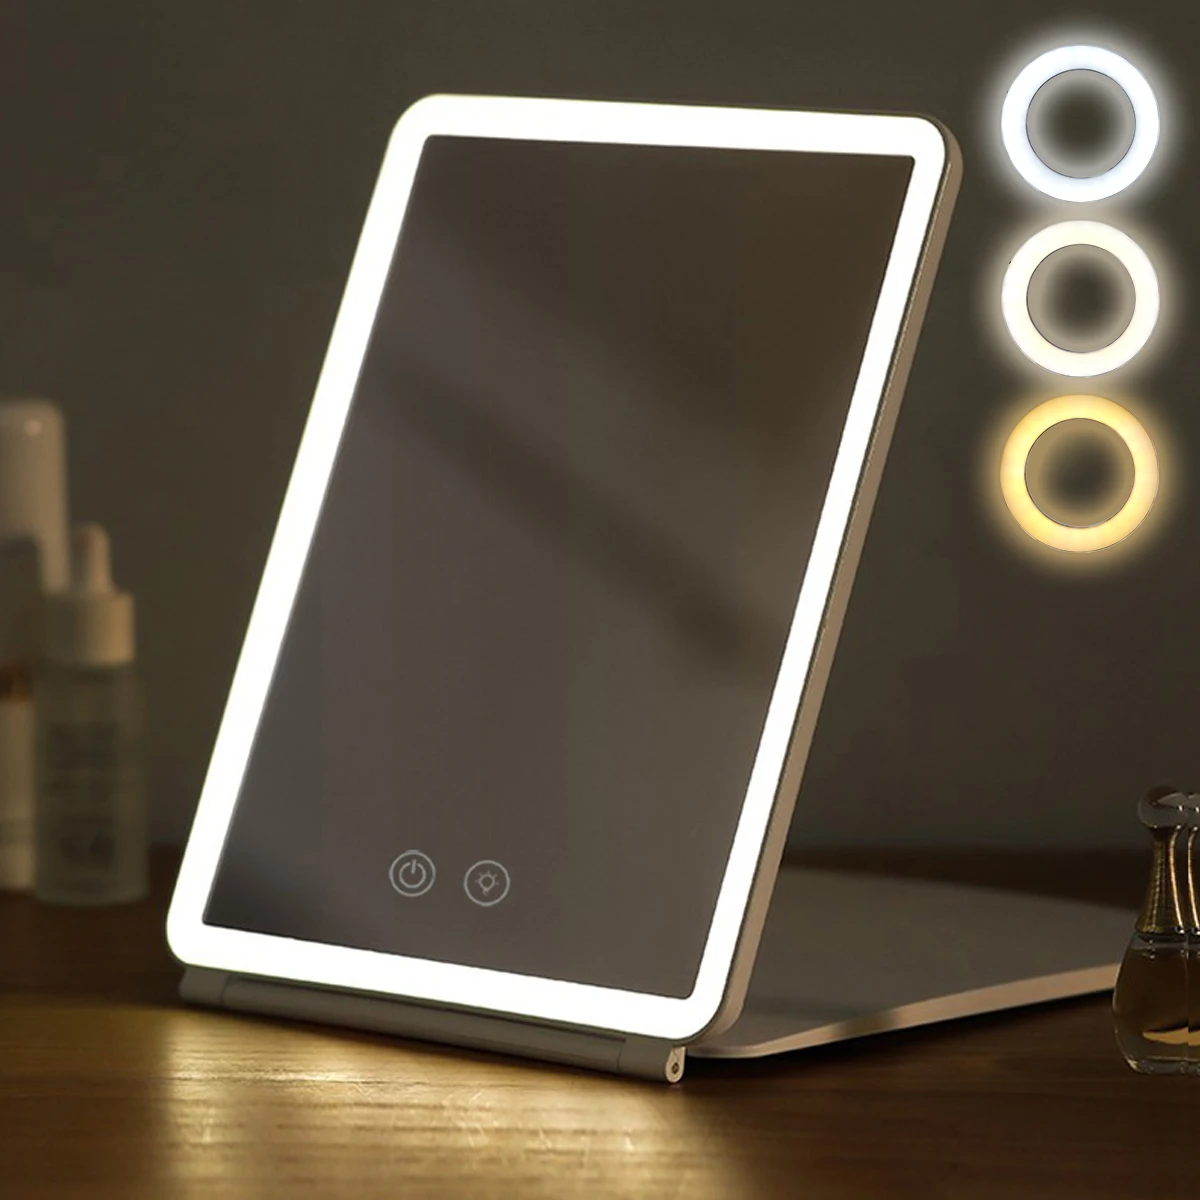 LED Touch Screen Makeup Mirror Folding Mirror Lighted Makeup Mirror 3 Colors Light Modes USB Rechargeable Cosmetic Mirror Tools